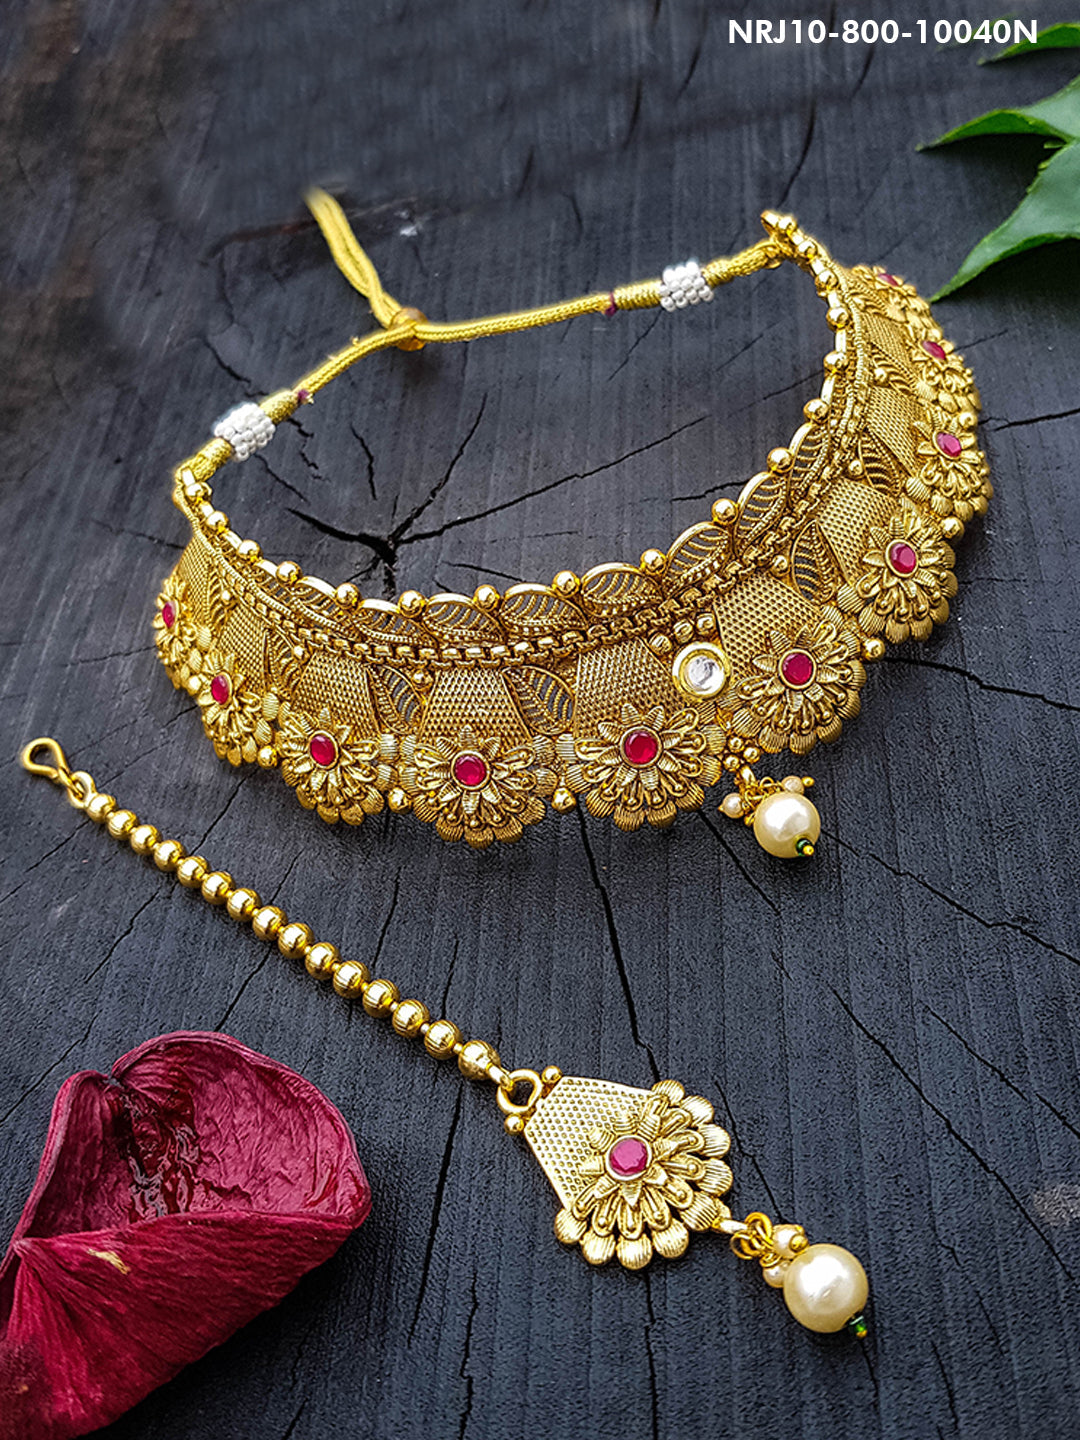 Gold Plated Premium Choker Necklace with Tikka Necklace (ONLY Necklace) 10040N